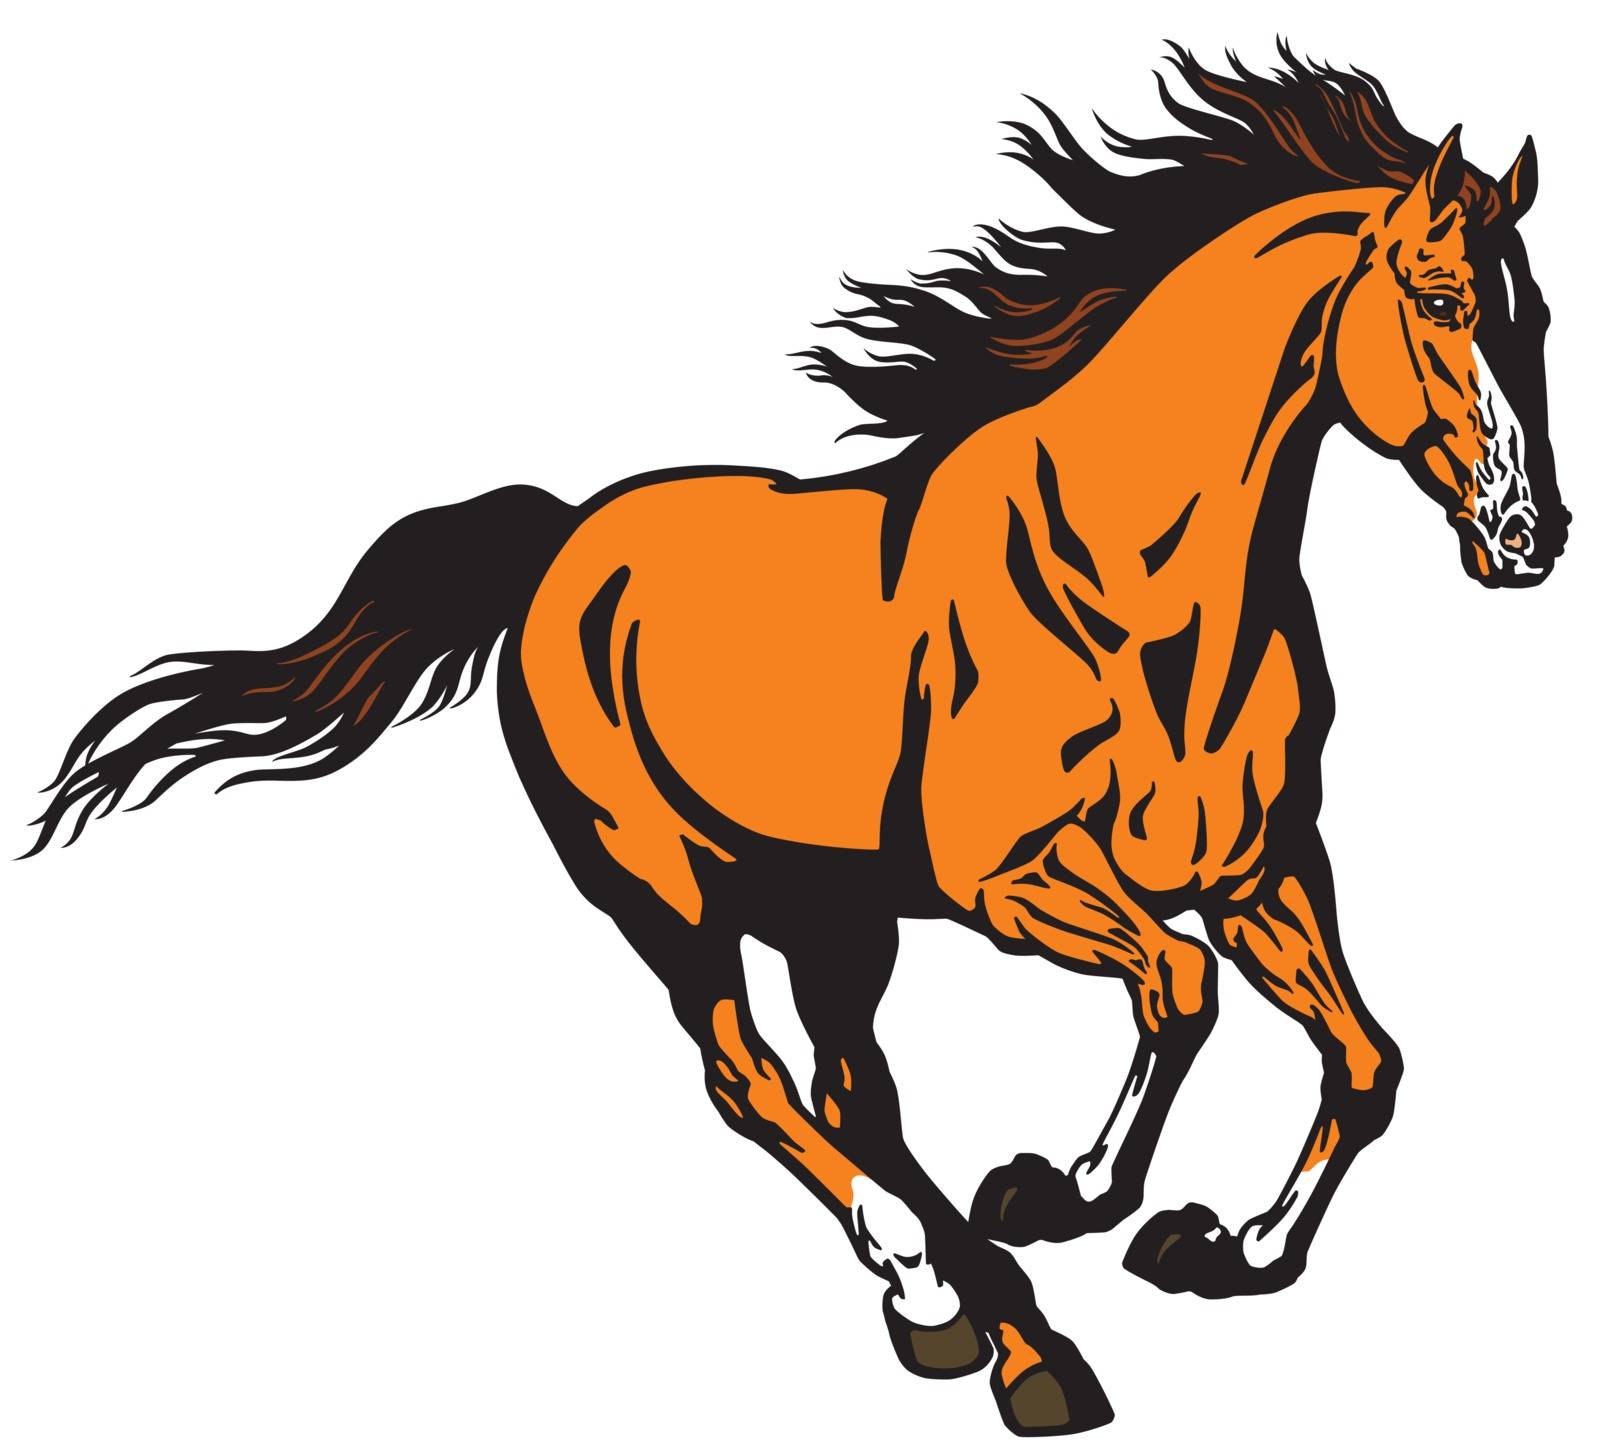 running wild stallion horse. Mustang in the gallop .Isolated vector illustration